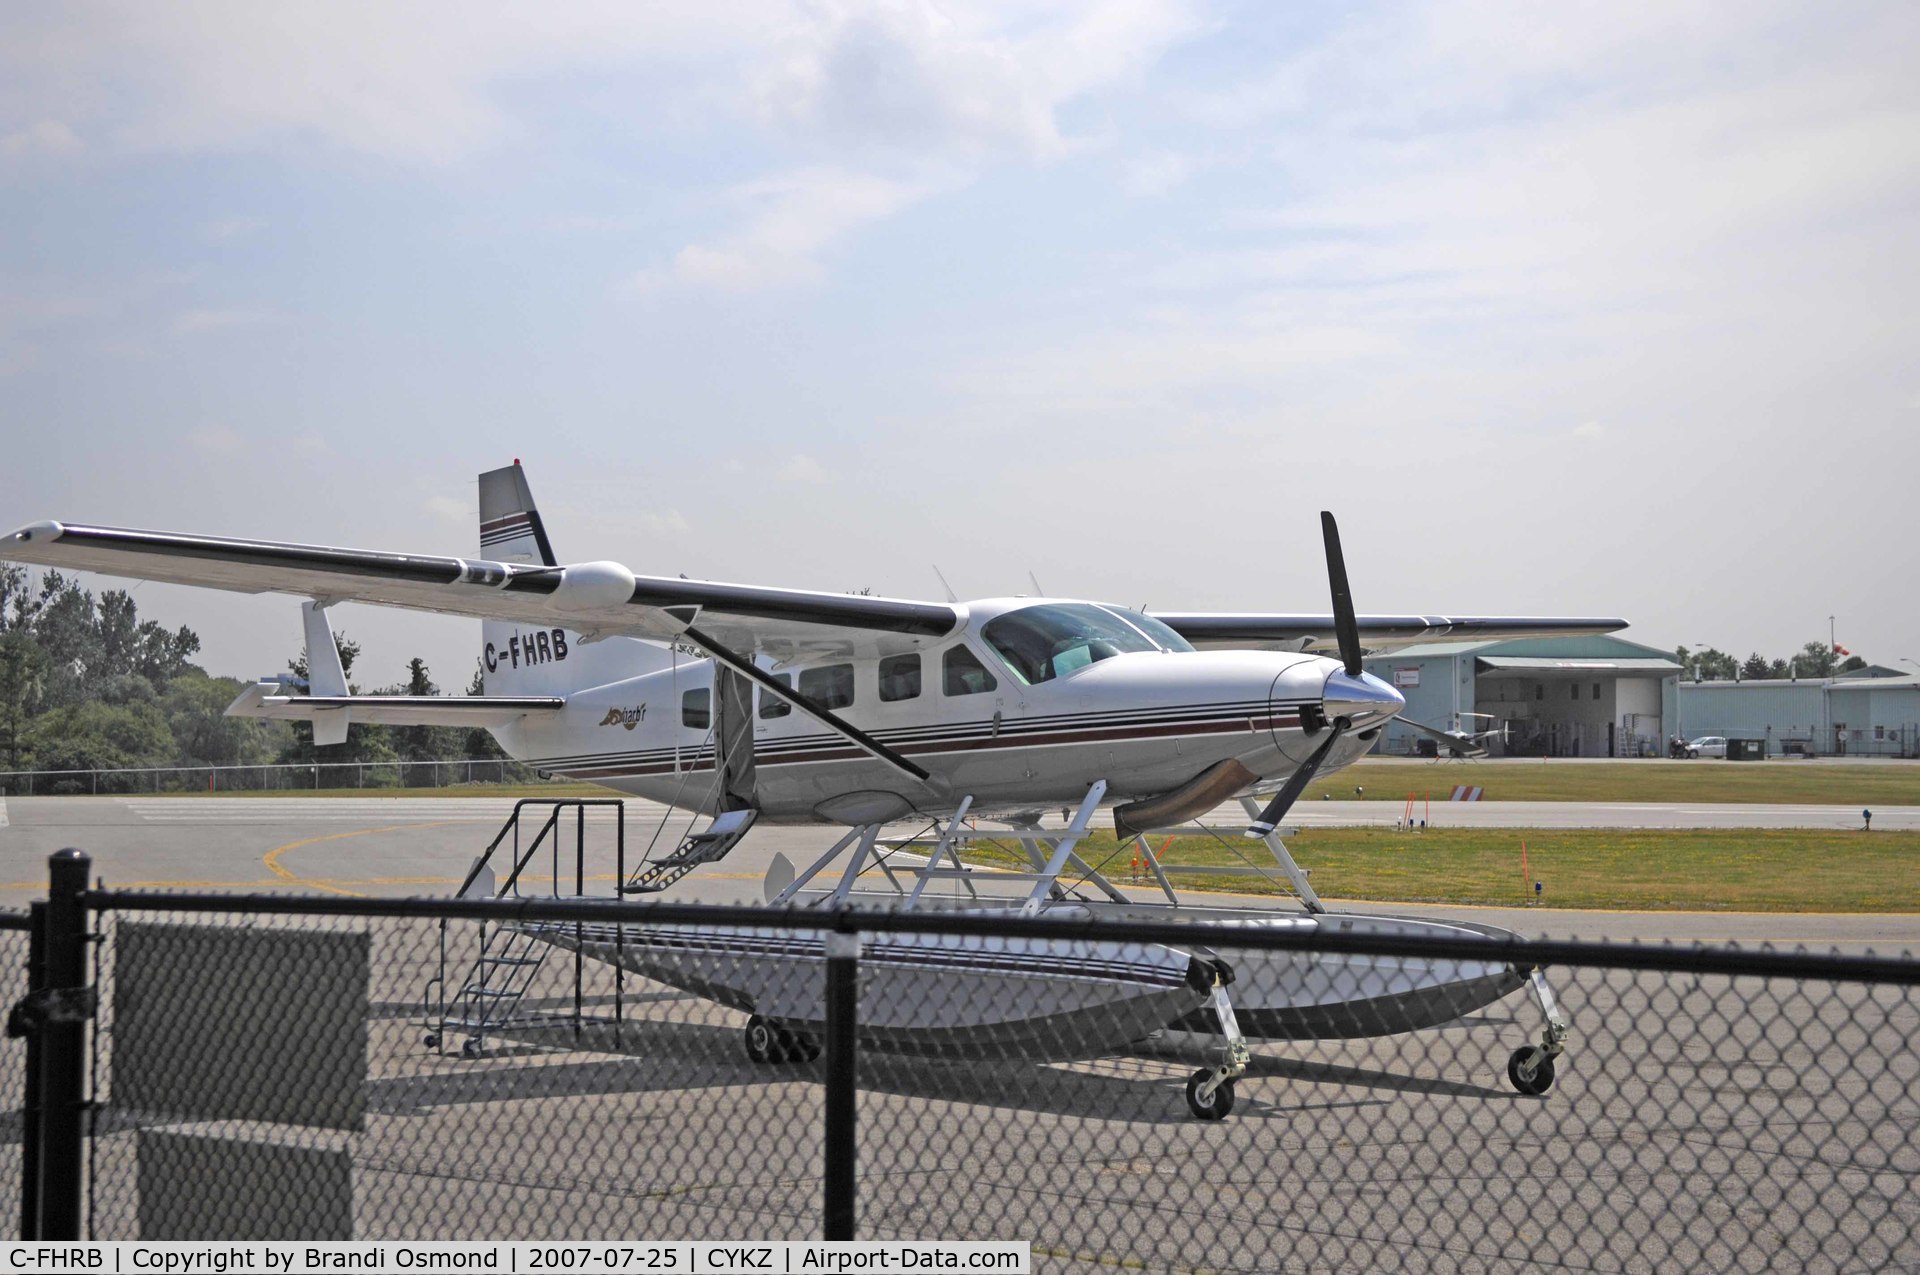 C-FHRB, 1998 Cessna 208 Caravan I C/N 20800291, At the ramp of Toronto/Buttonville Municipal Airport